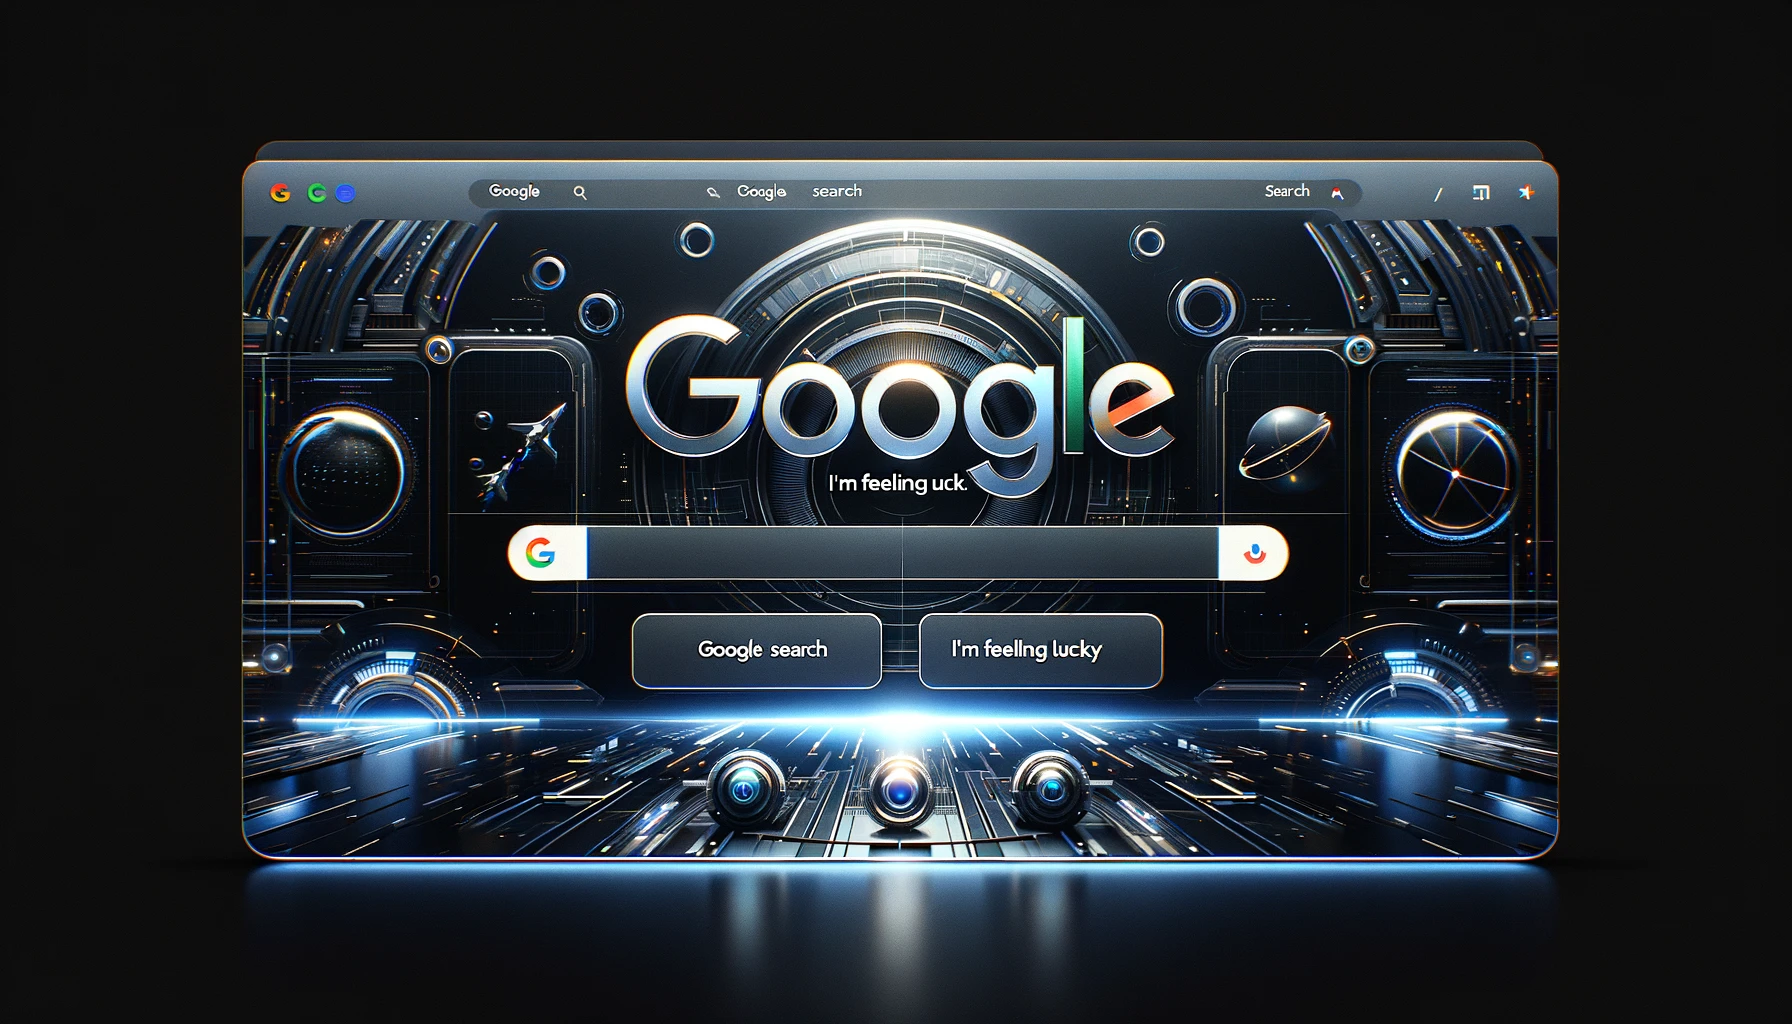 The image above presents a sleek and modern interpretation of the Google homepage, featuring a futuristic aesthetic.